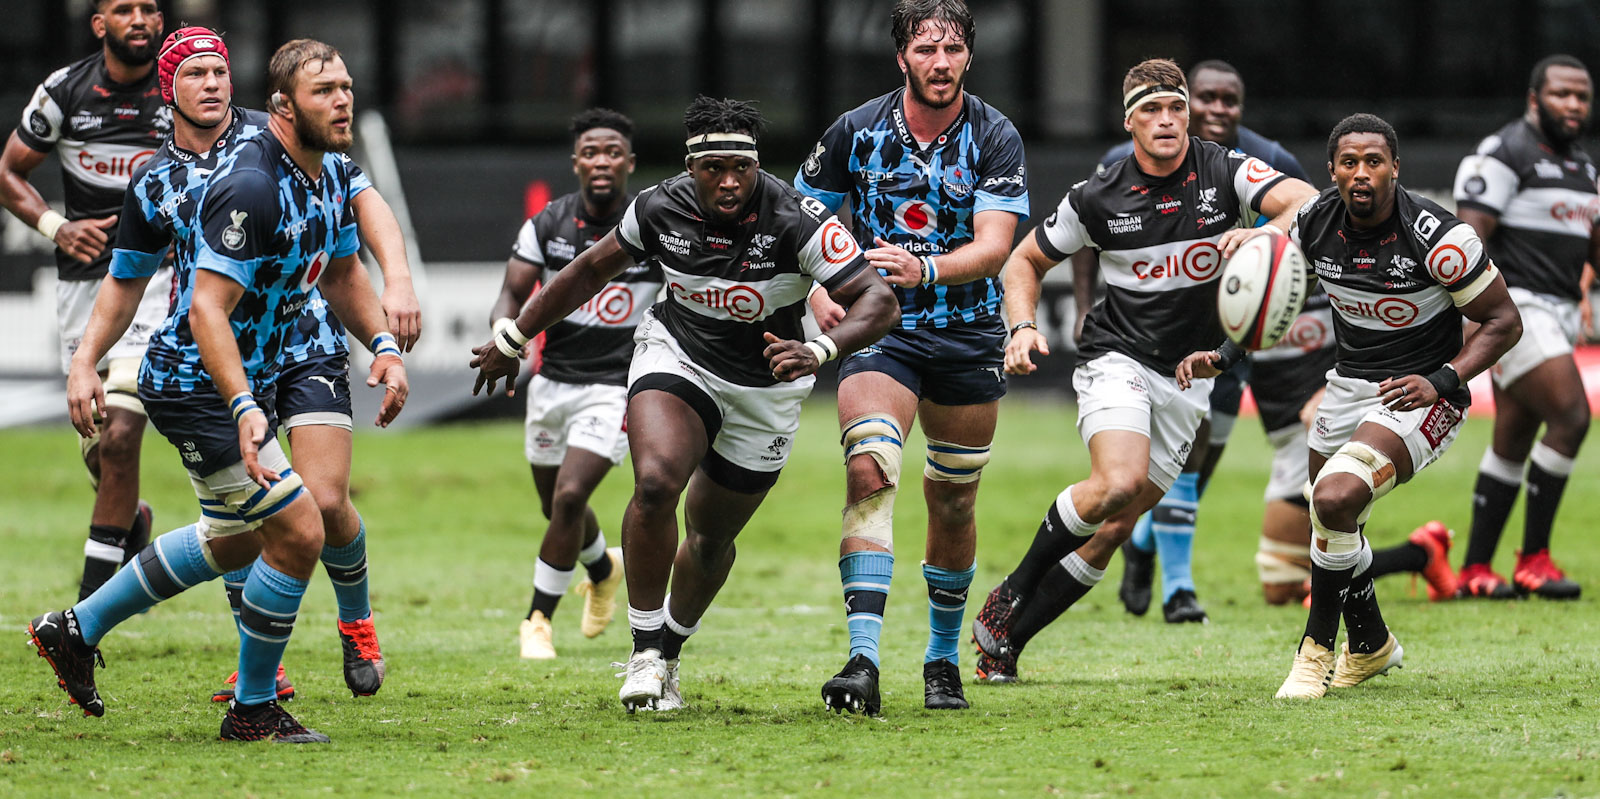 Action from earlier in the season between the Cell C Sharks and the Vodacom Bulls